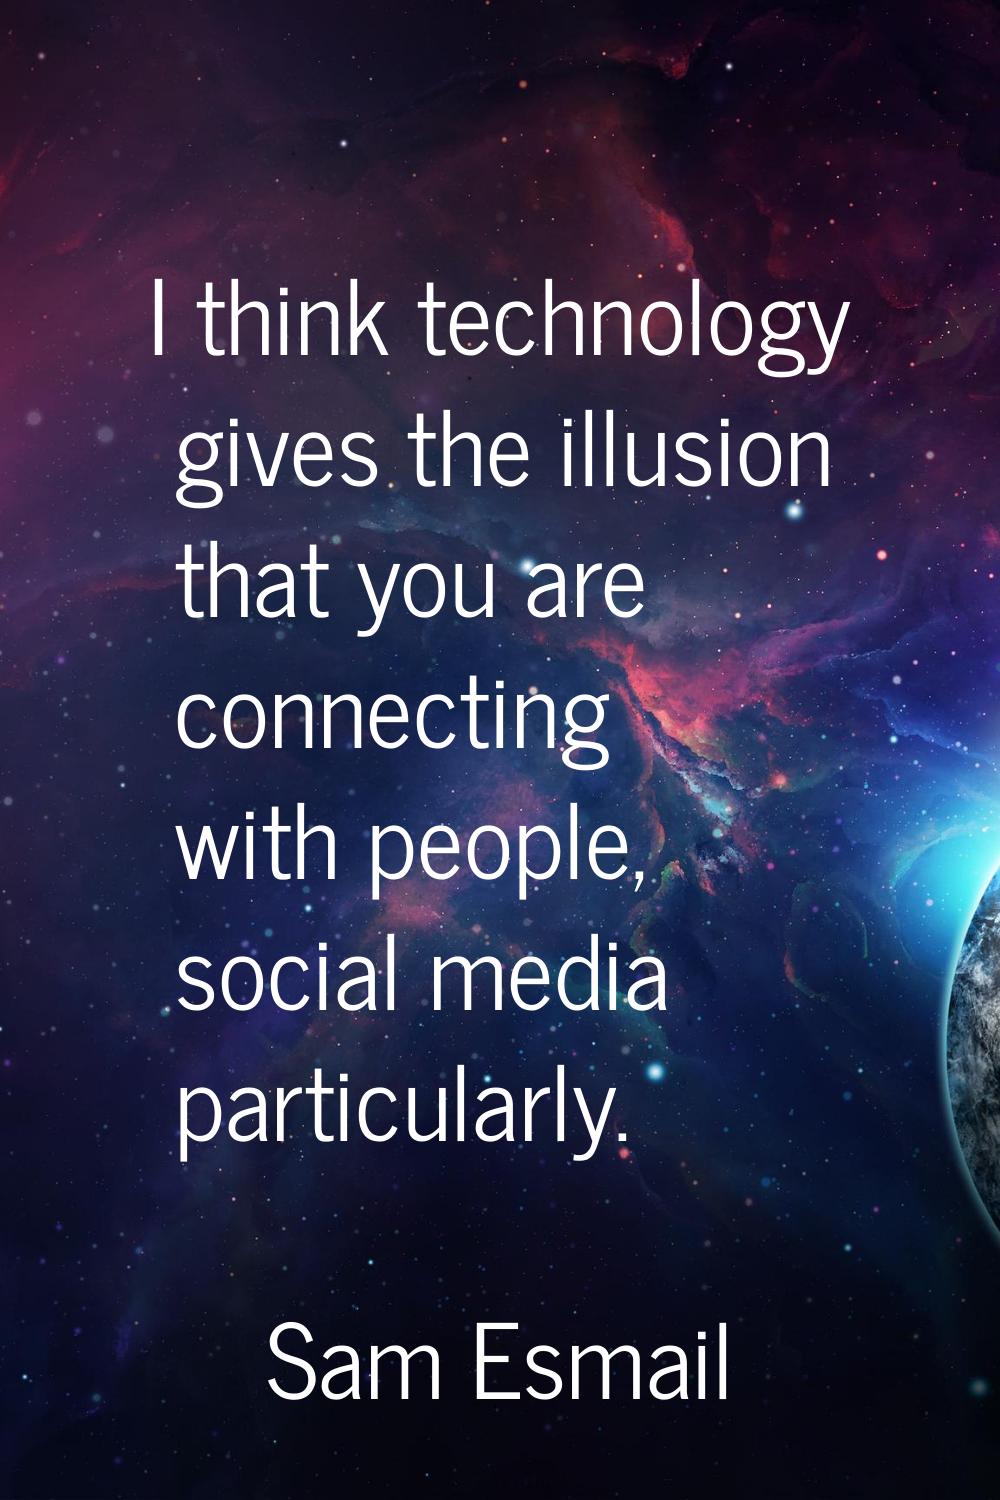 I think technology gives the illusion that you are connecting with people, social media particularl